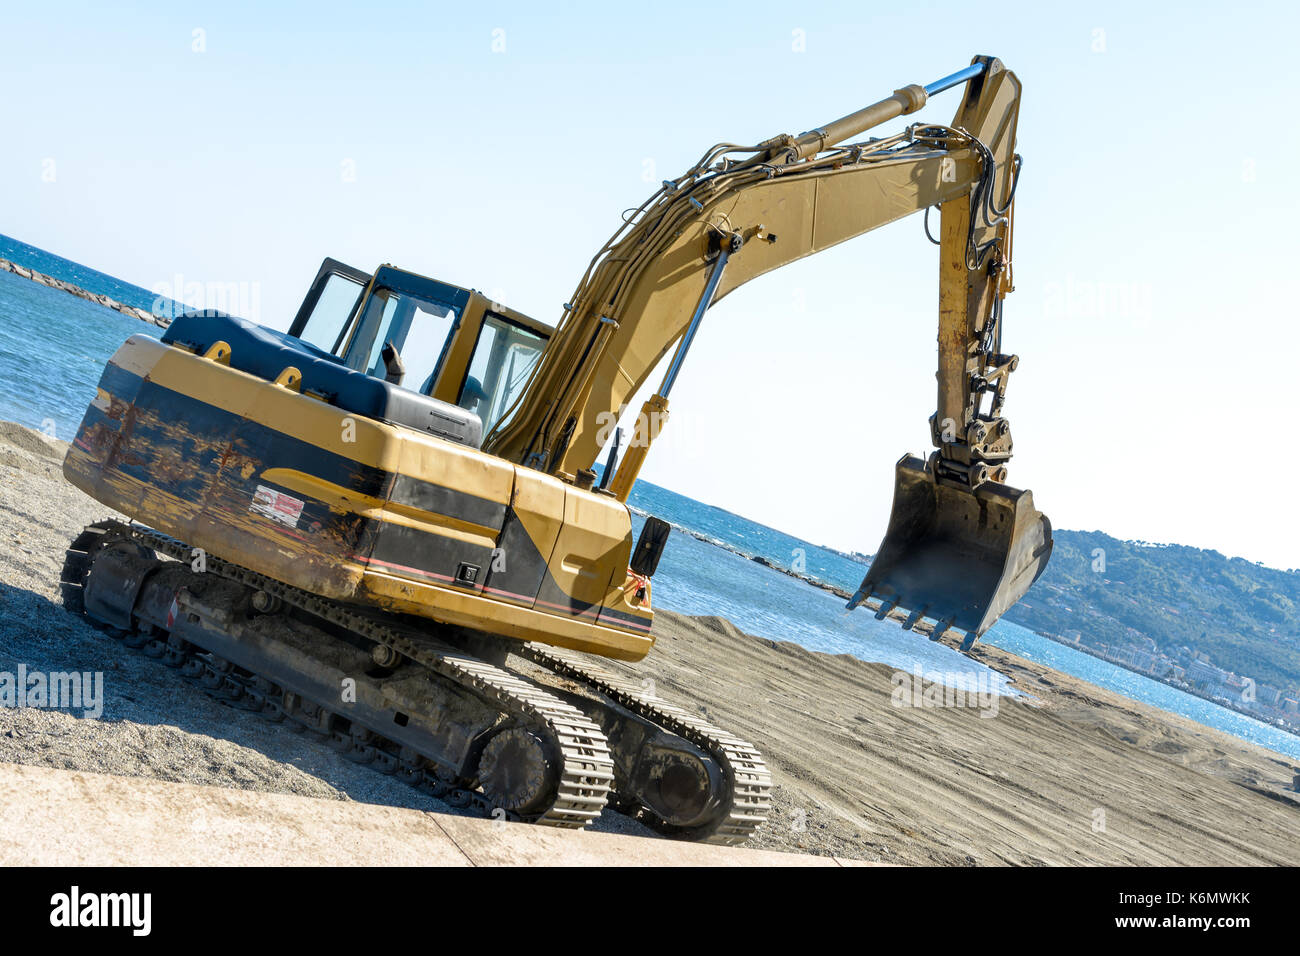 excavator that is working on the beach to smooth the sand before the start of the summer season Stock Photo